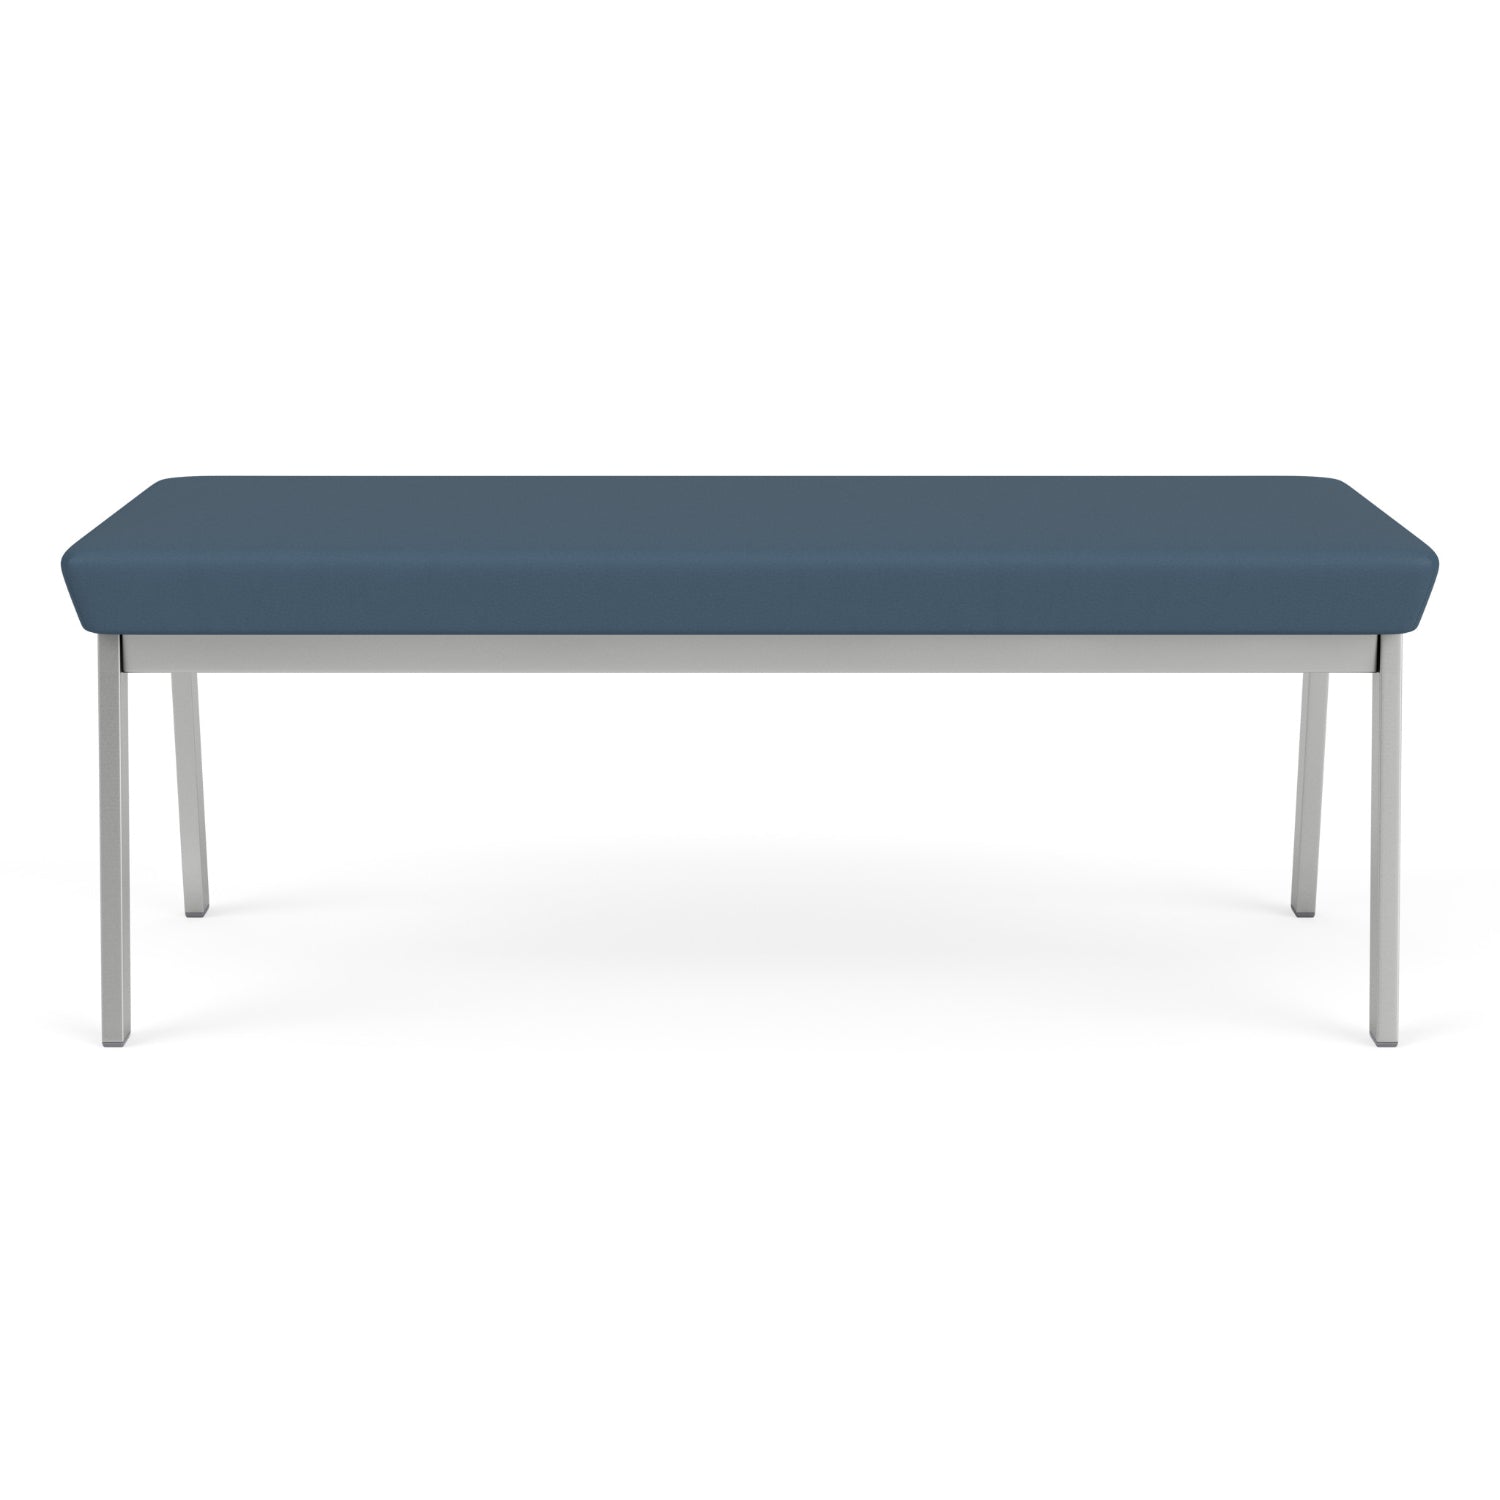 Newport Collection Reception Seating, 2 Seat Bench, Standard Vinyl Upholstery, FREE SHIPPING